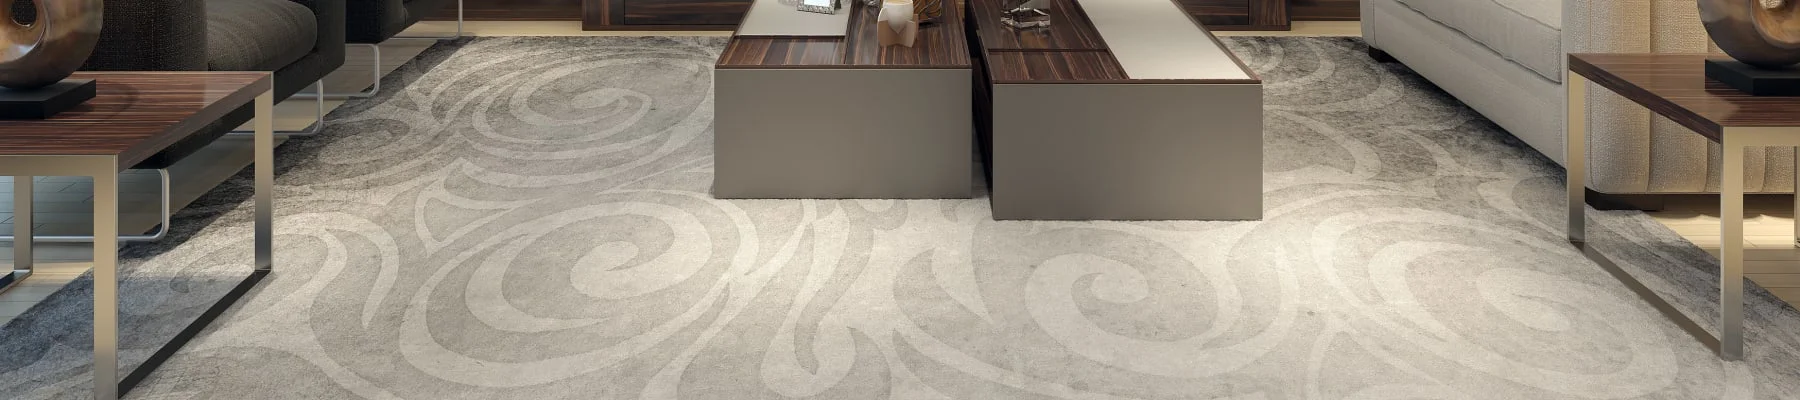 Modern design area rug provided by Johnson & Sons Flooring in the Knoxville, TN area